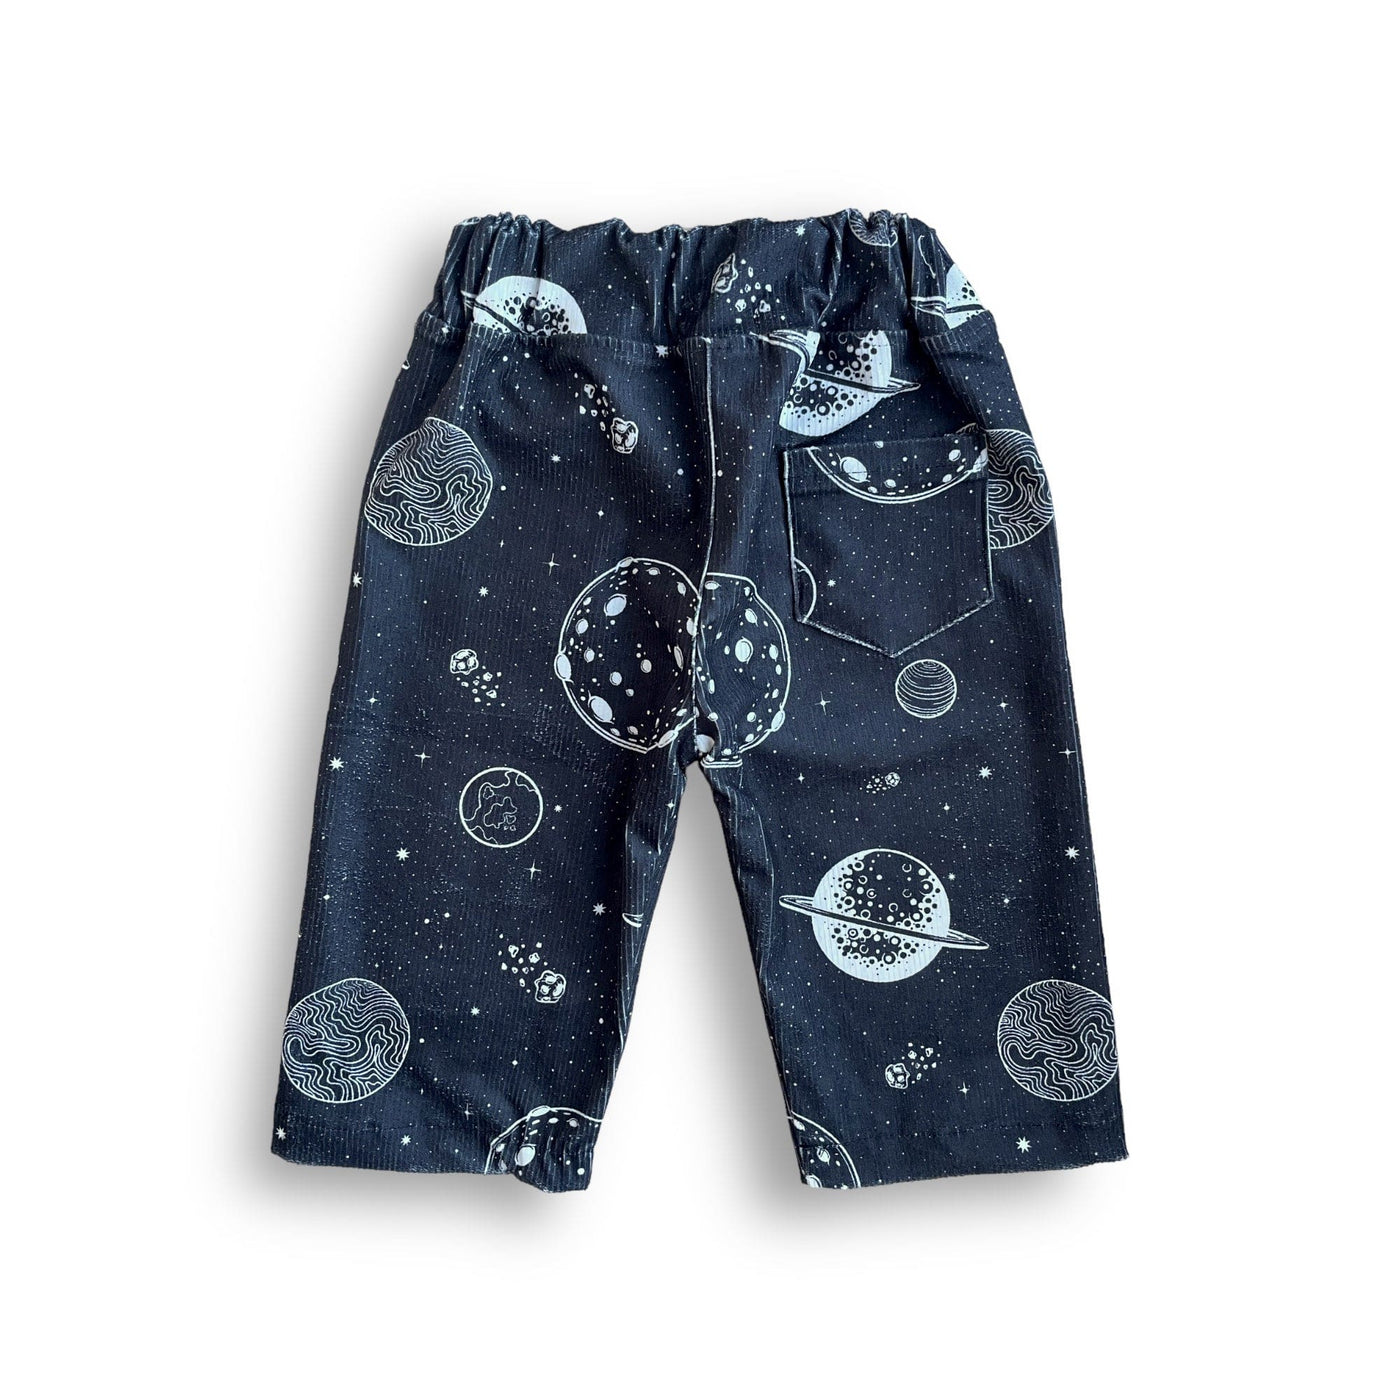 Best Day Ever Kids Baby & Toddler Bottoms The Big Baggy Corduroy Pant - Space Cadet buy online boutique kids clothing